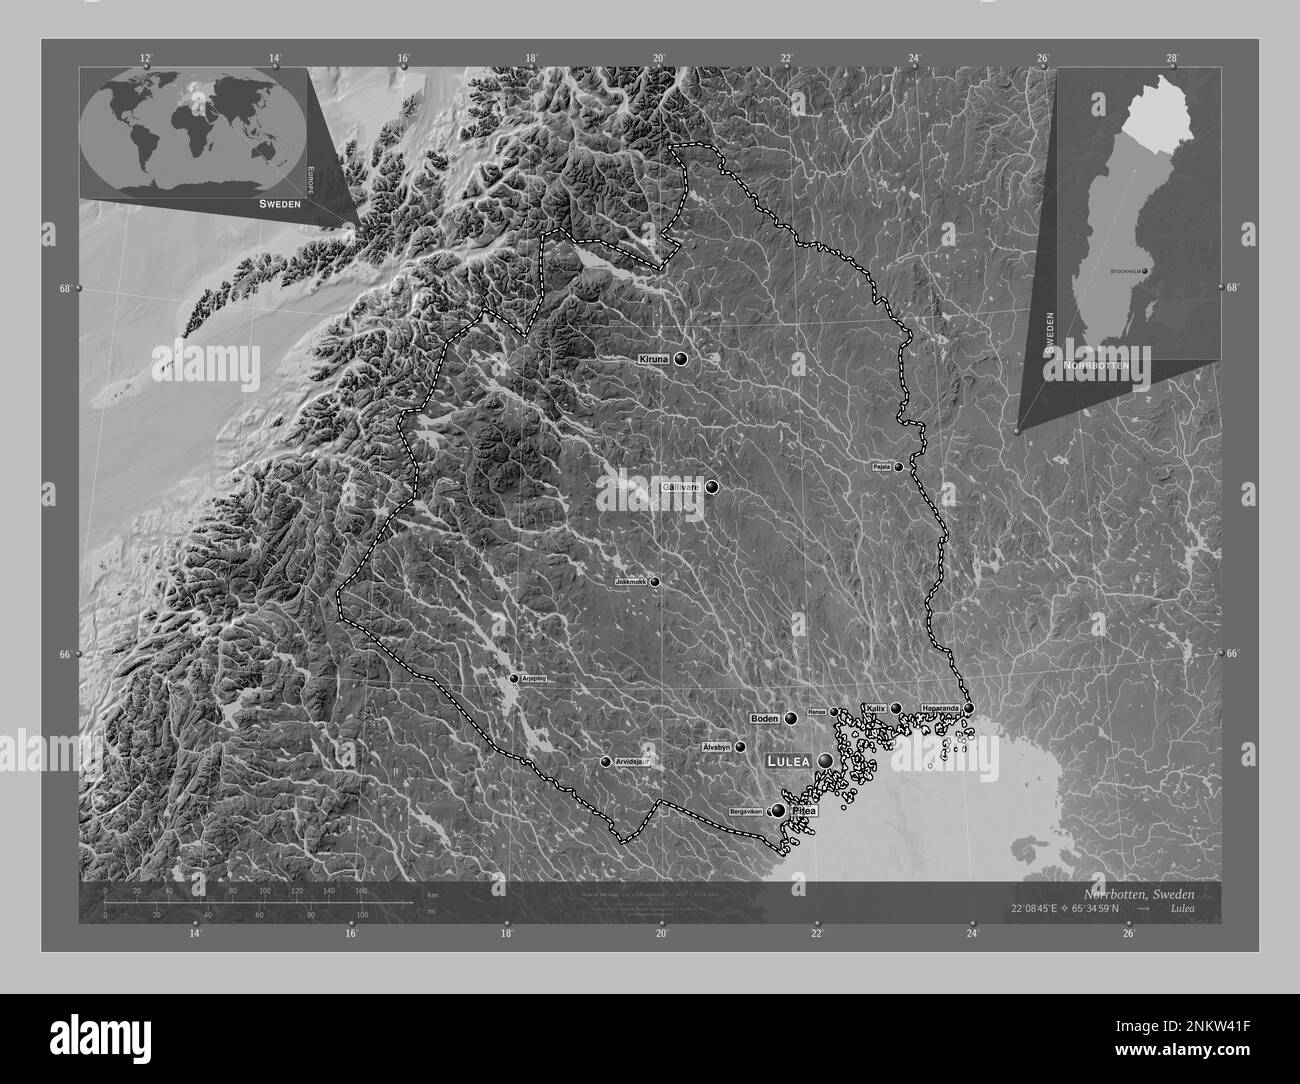 Norrbotten, county of Sweden. Grayscale elevation map with lakes and rivers. Locations and names of major cities of the region. Corner auxiliary locat Stock Photo